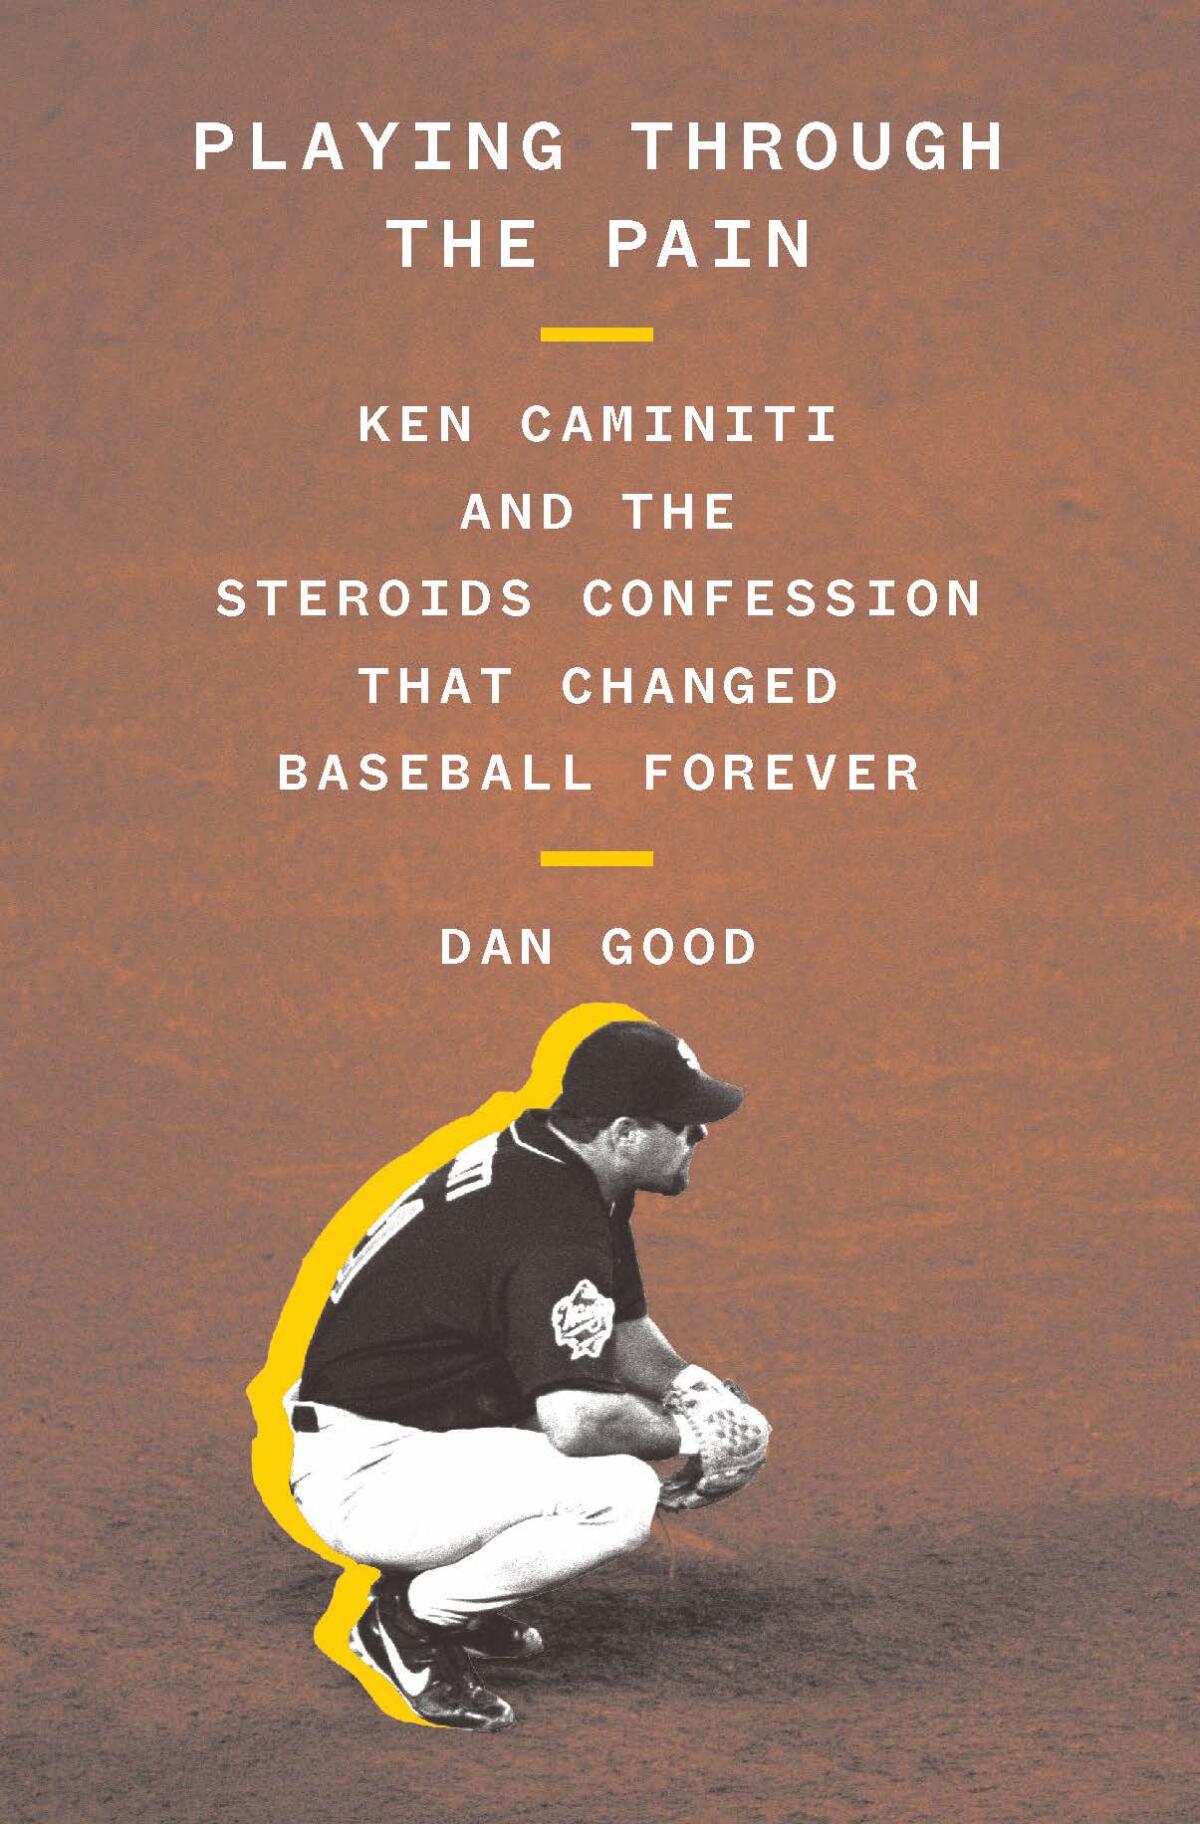 Day 18 of 2022 baseball books: How will you remember Ken Caminiti